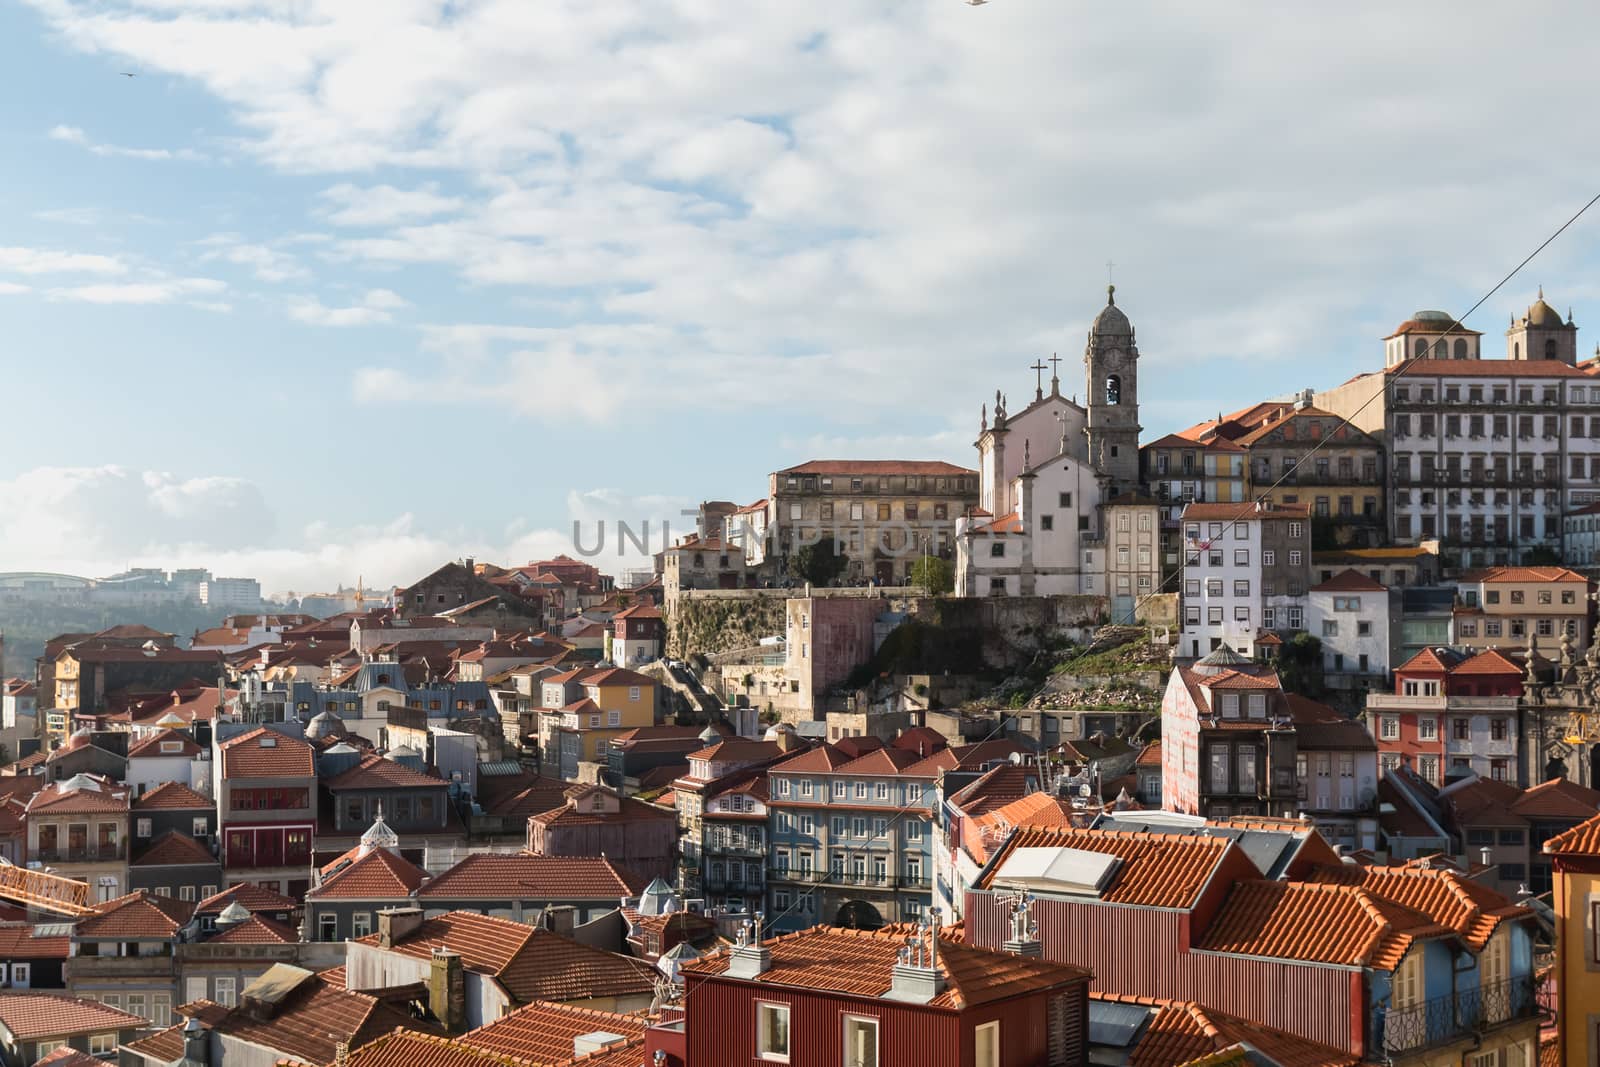 Porto, Portugal - November 30, 2018: View of the typical architecture of the historic city center from the top of the hill on an autumn day